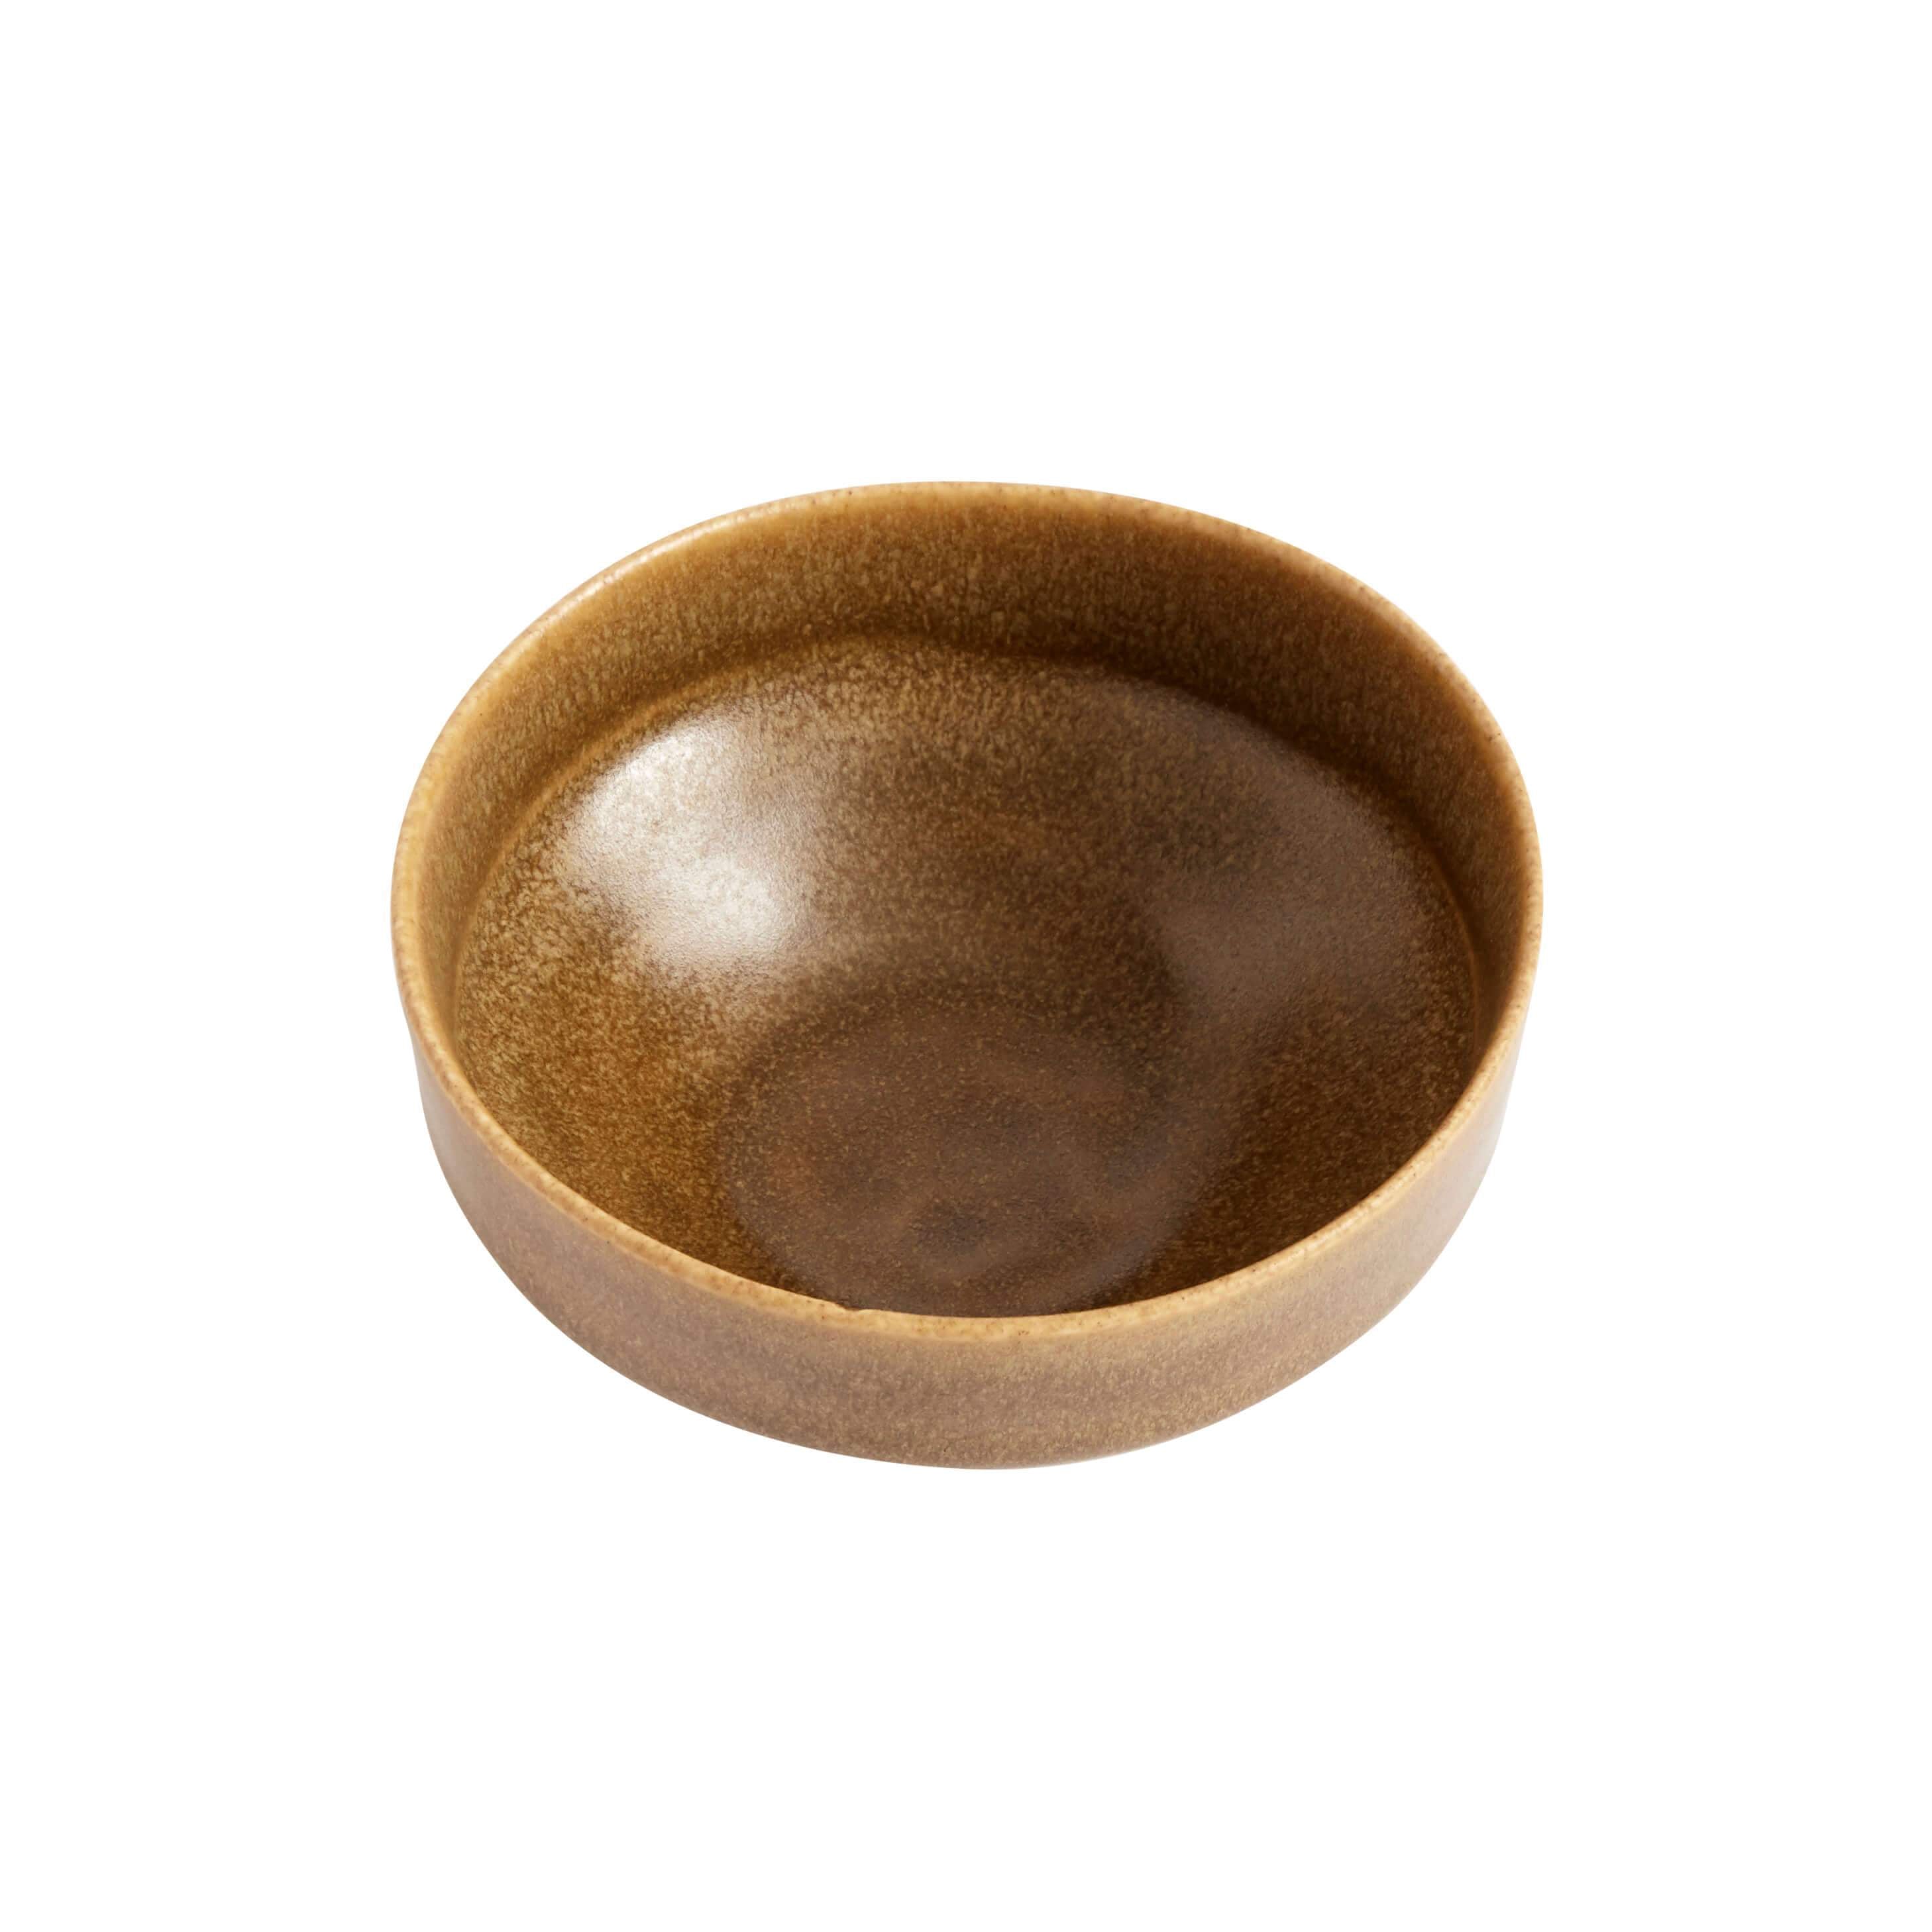 Muubs Ceto Dip Bowl -mosterd, 11 cm